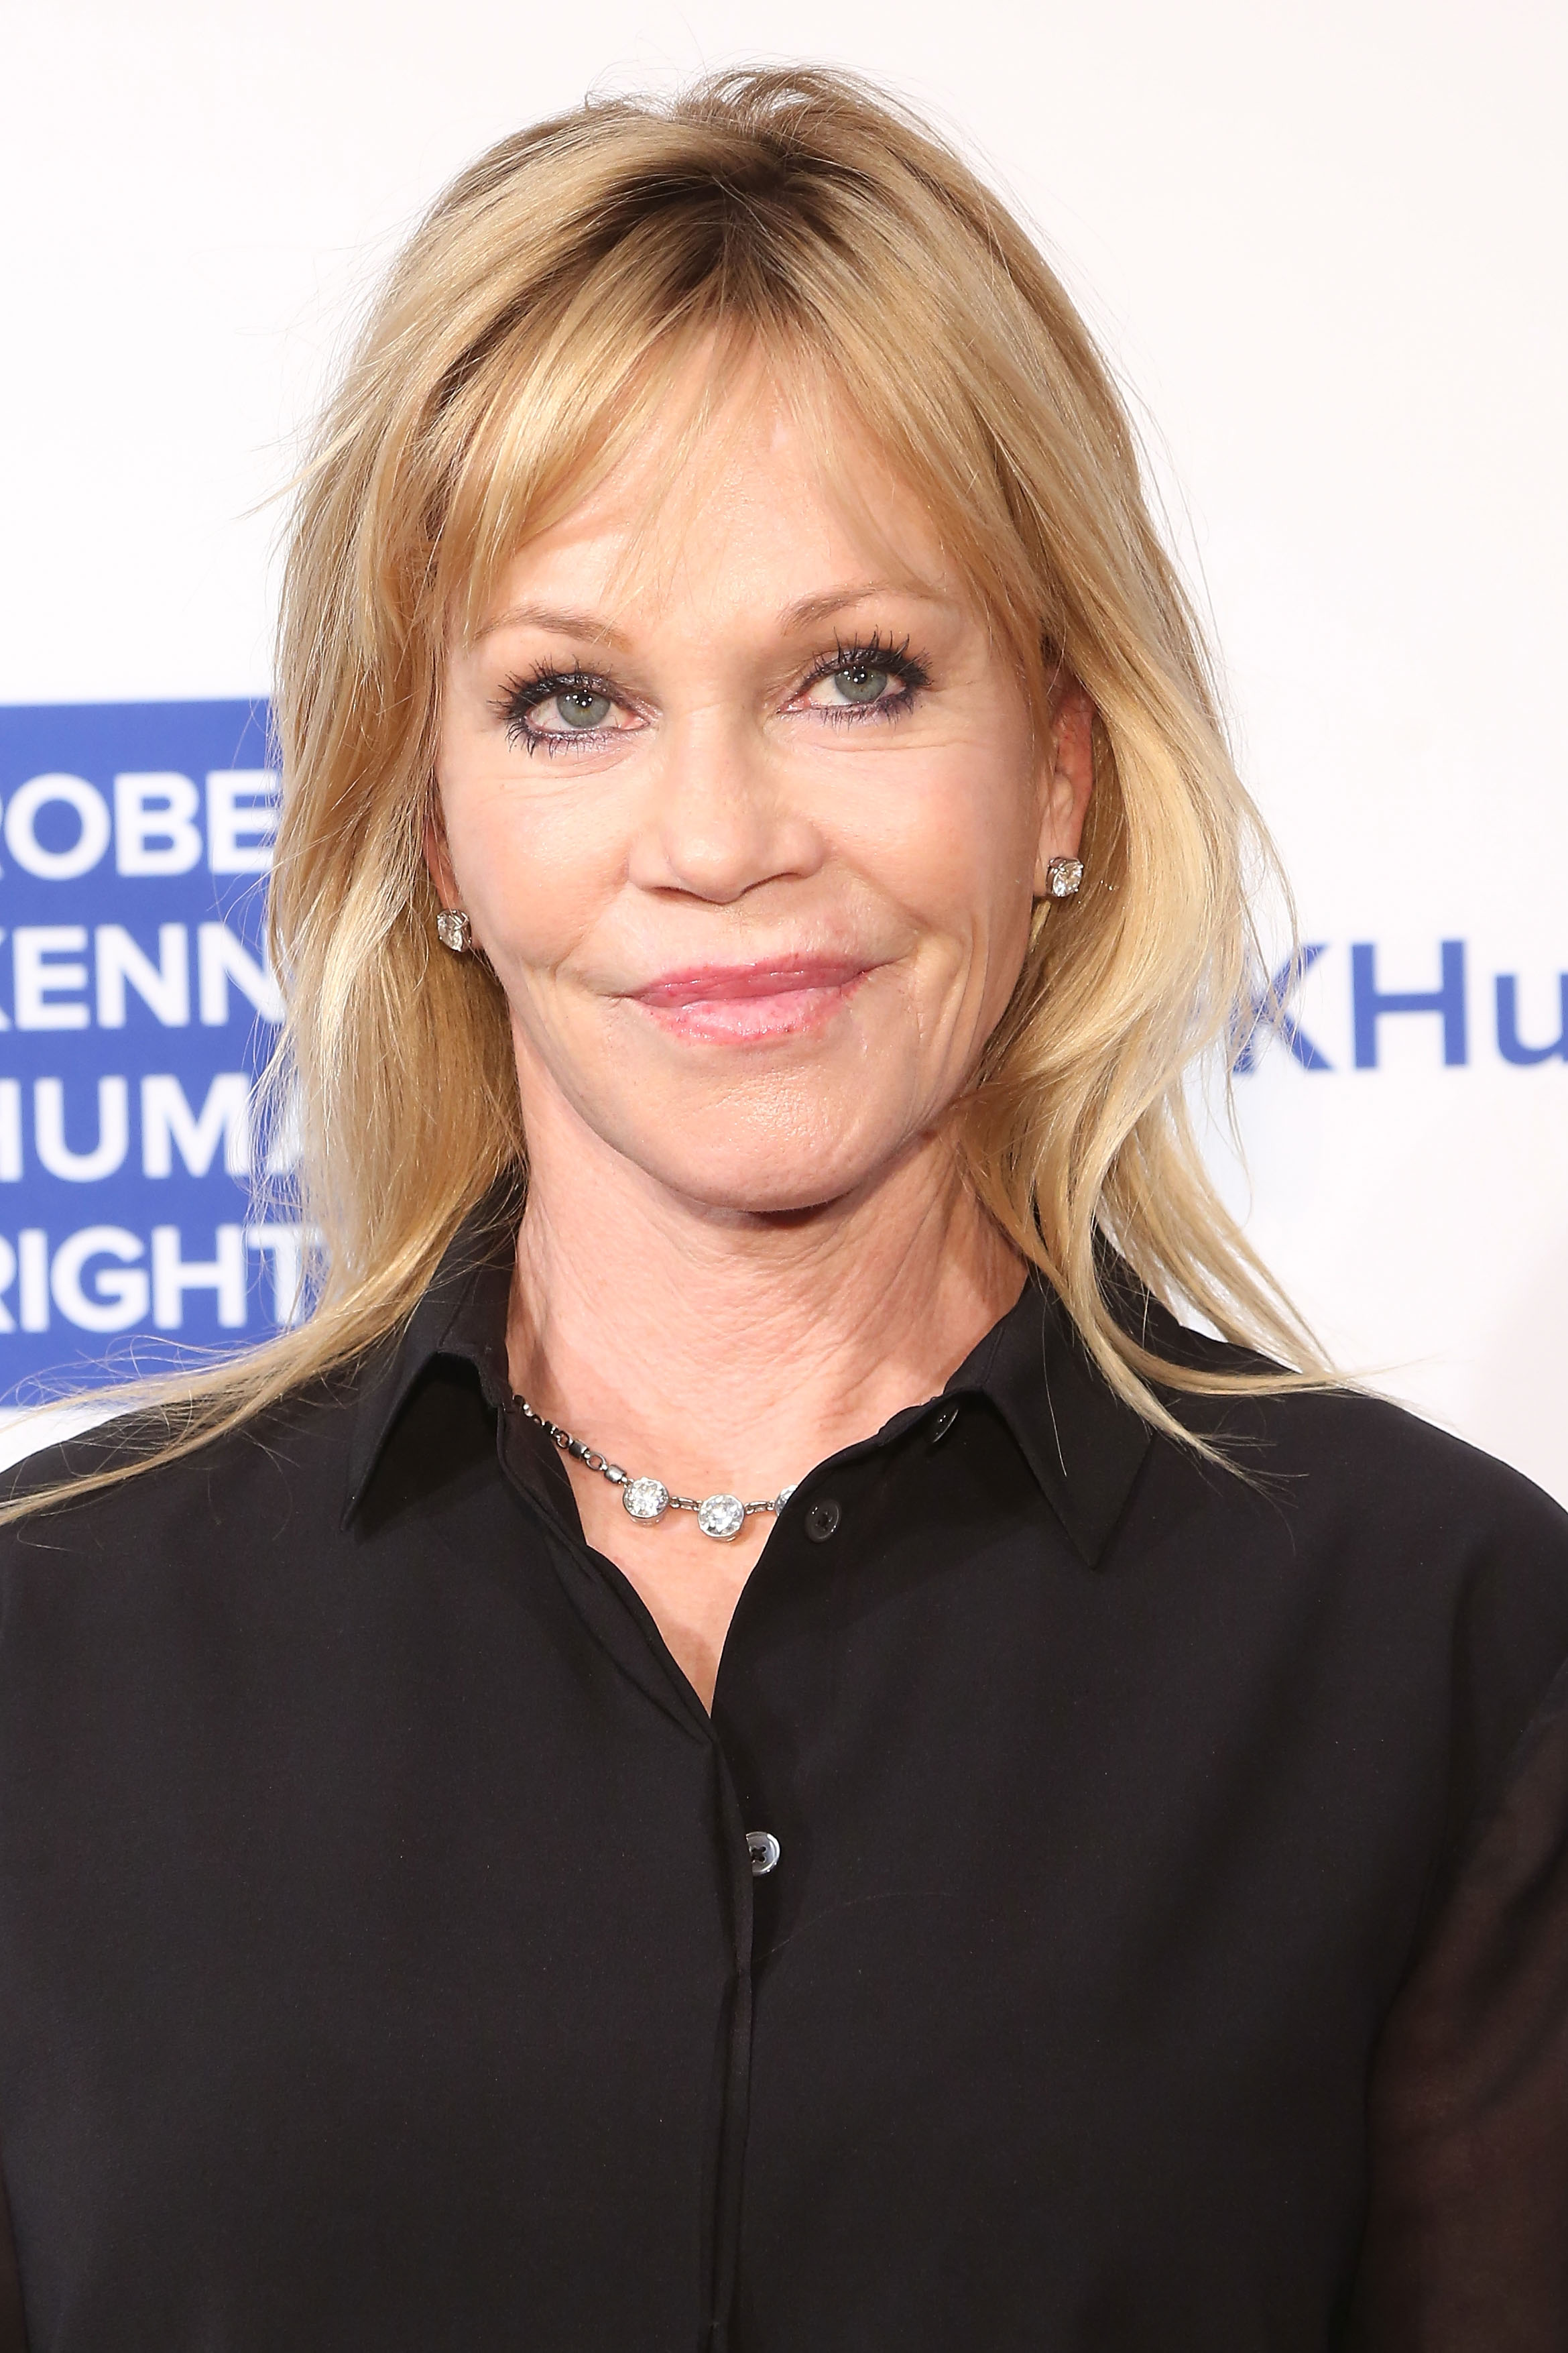 Melanie Griffith at the 2014 Robert F. Kennedy Ripple of Hope Gala on December 16, 2014, in New York City. | Source: Getty Images